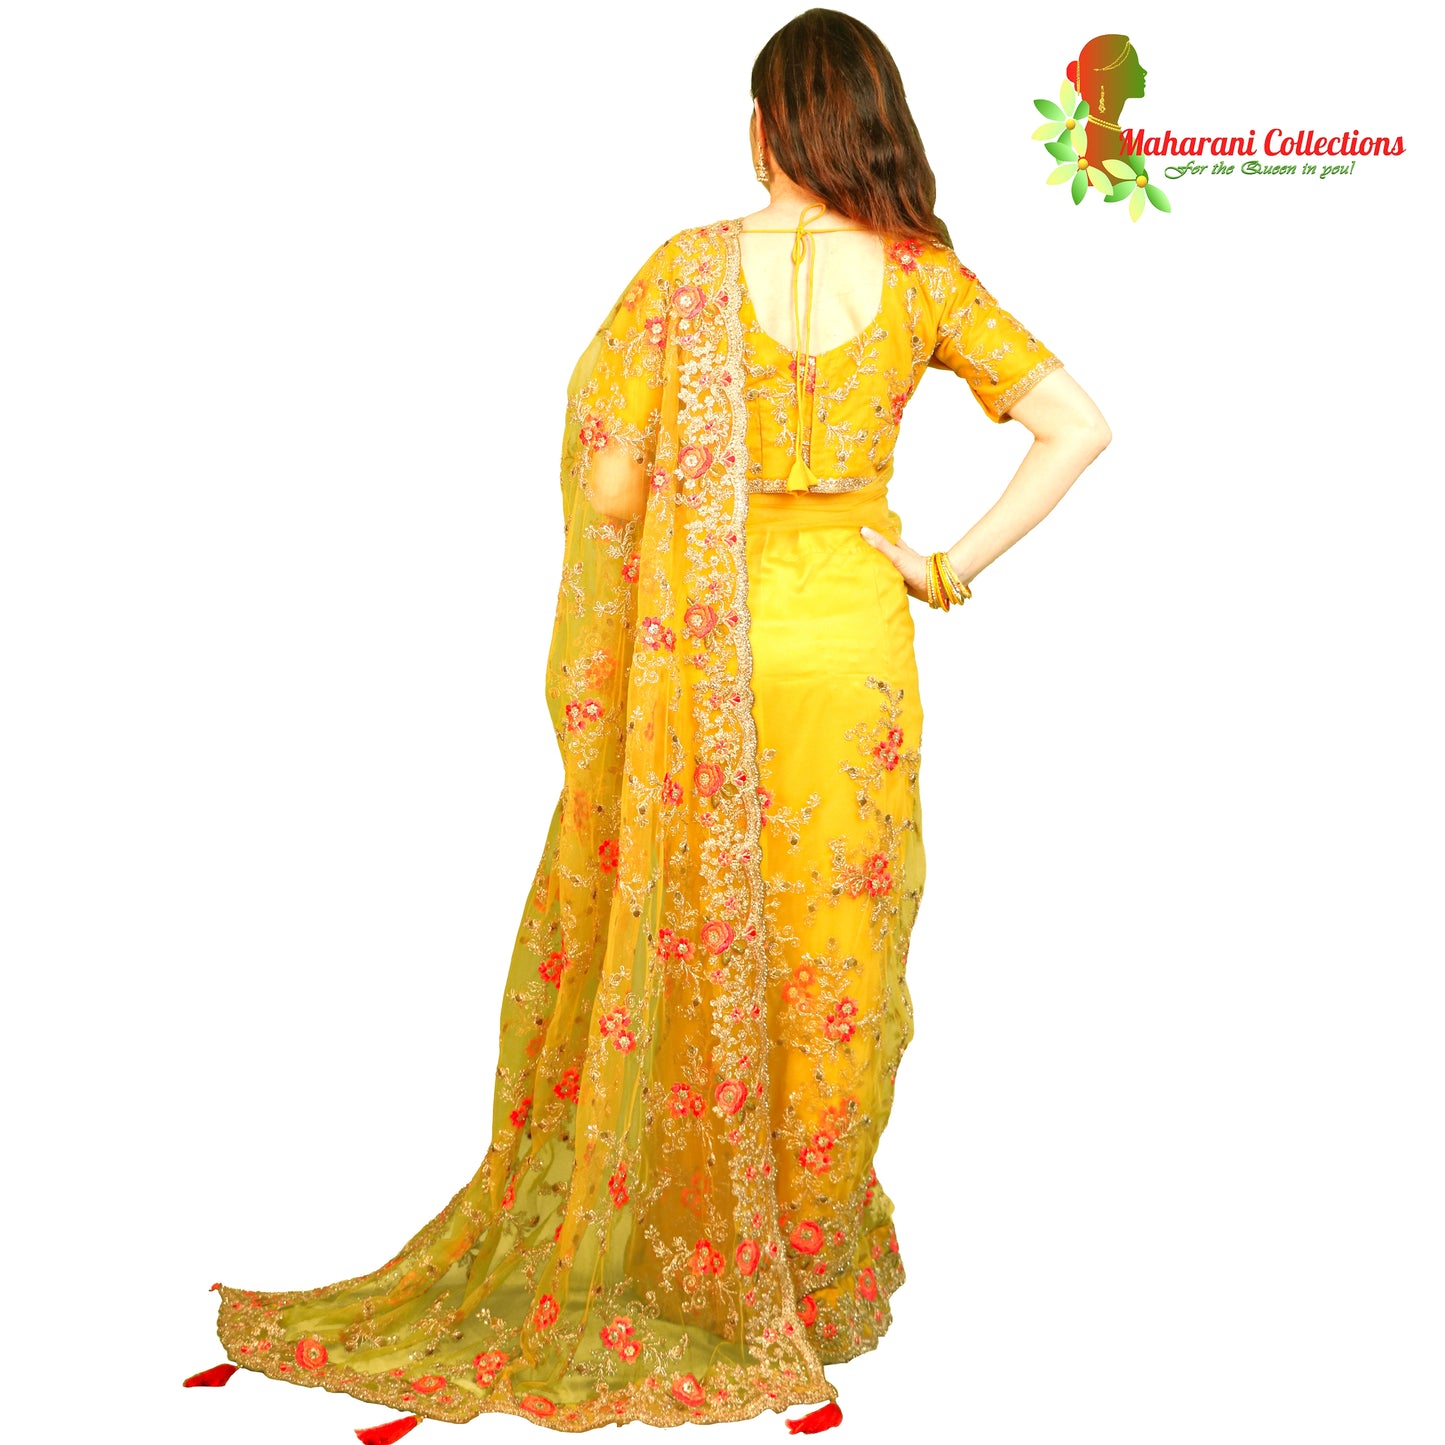 Maharani's Designer Party Wear Net Silk Saree - Deep Yellow (with stitched Blouse and Petticoat)